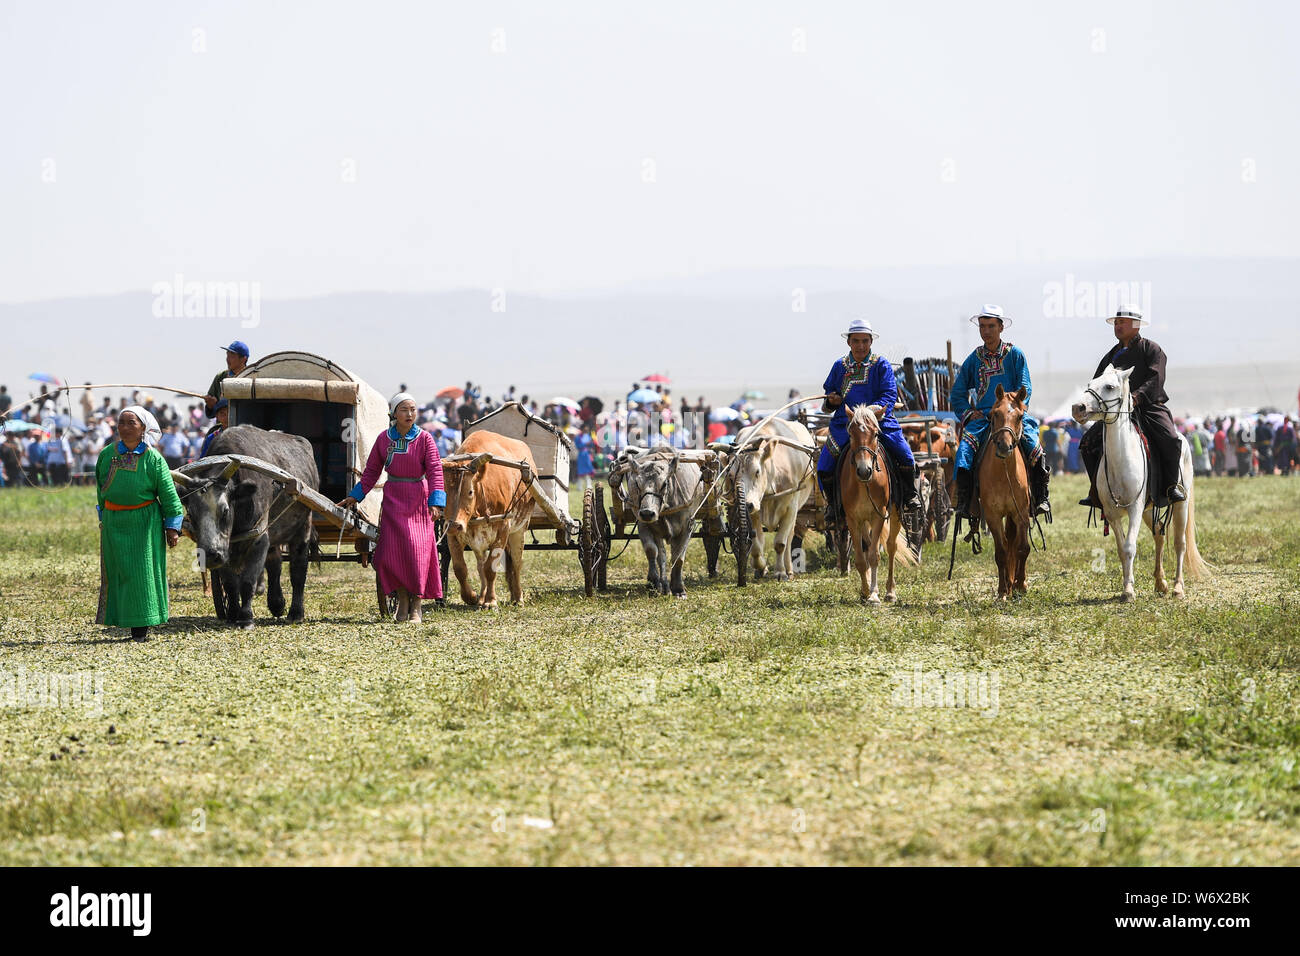 Xilinhot, China's Inner Mongolia Autonomous Region. 3rd Aug, 2019. Herdsmen display the local folk culture by pulling the "lele cart", a special Mongolian cart, during the opening ceremony of the Nadam Fair held in Xilinhot, Xilin Gol League, north China's Inner Mongolia Autonomous Region, Aug. 3, 2019. A series of activities, including horse riding contest, traditional archery contest and folk dress show will be held during the event. Credit: Liu Lei/Xinhua/Alamy Live News Stock Photo